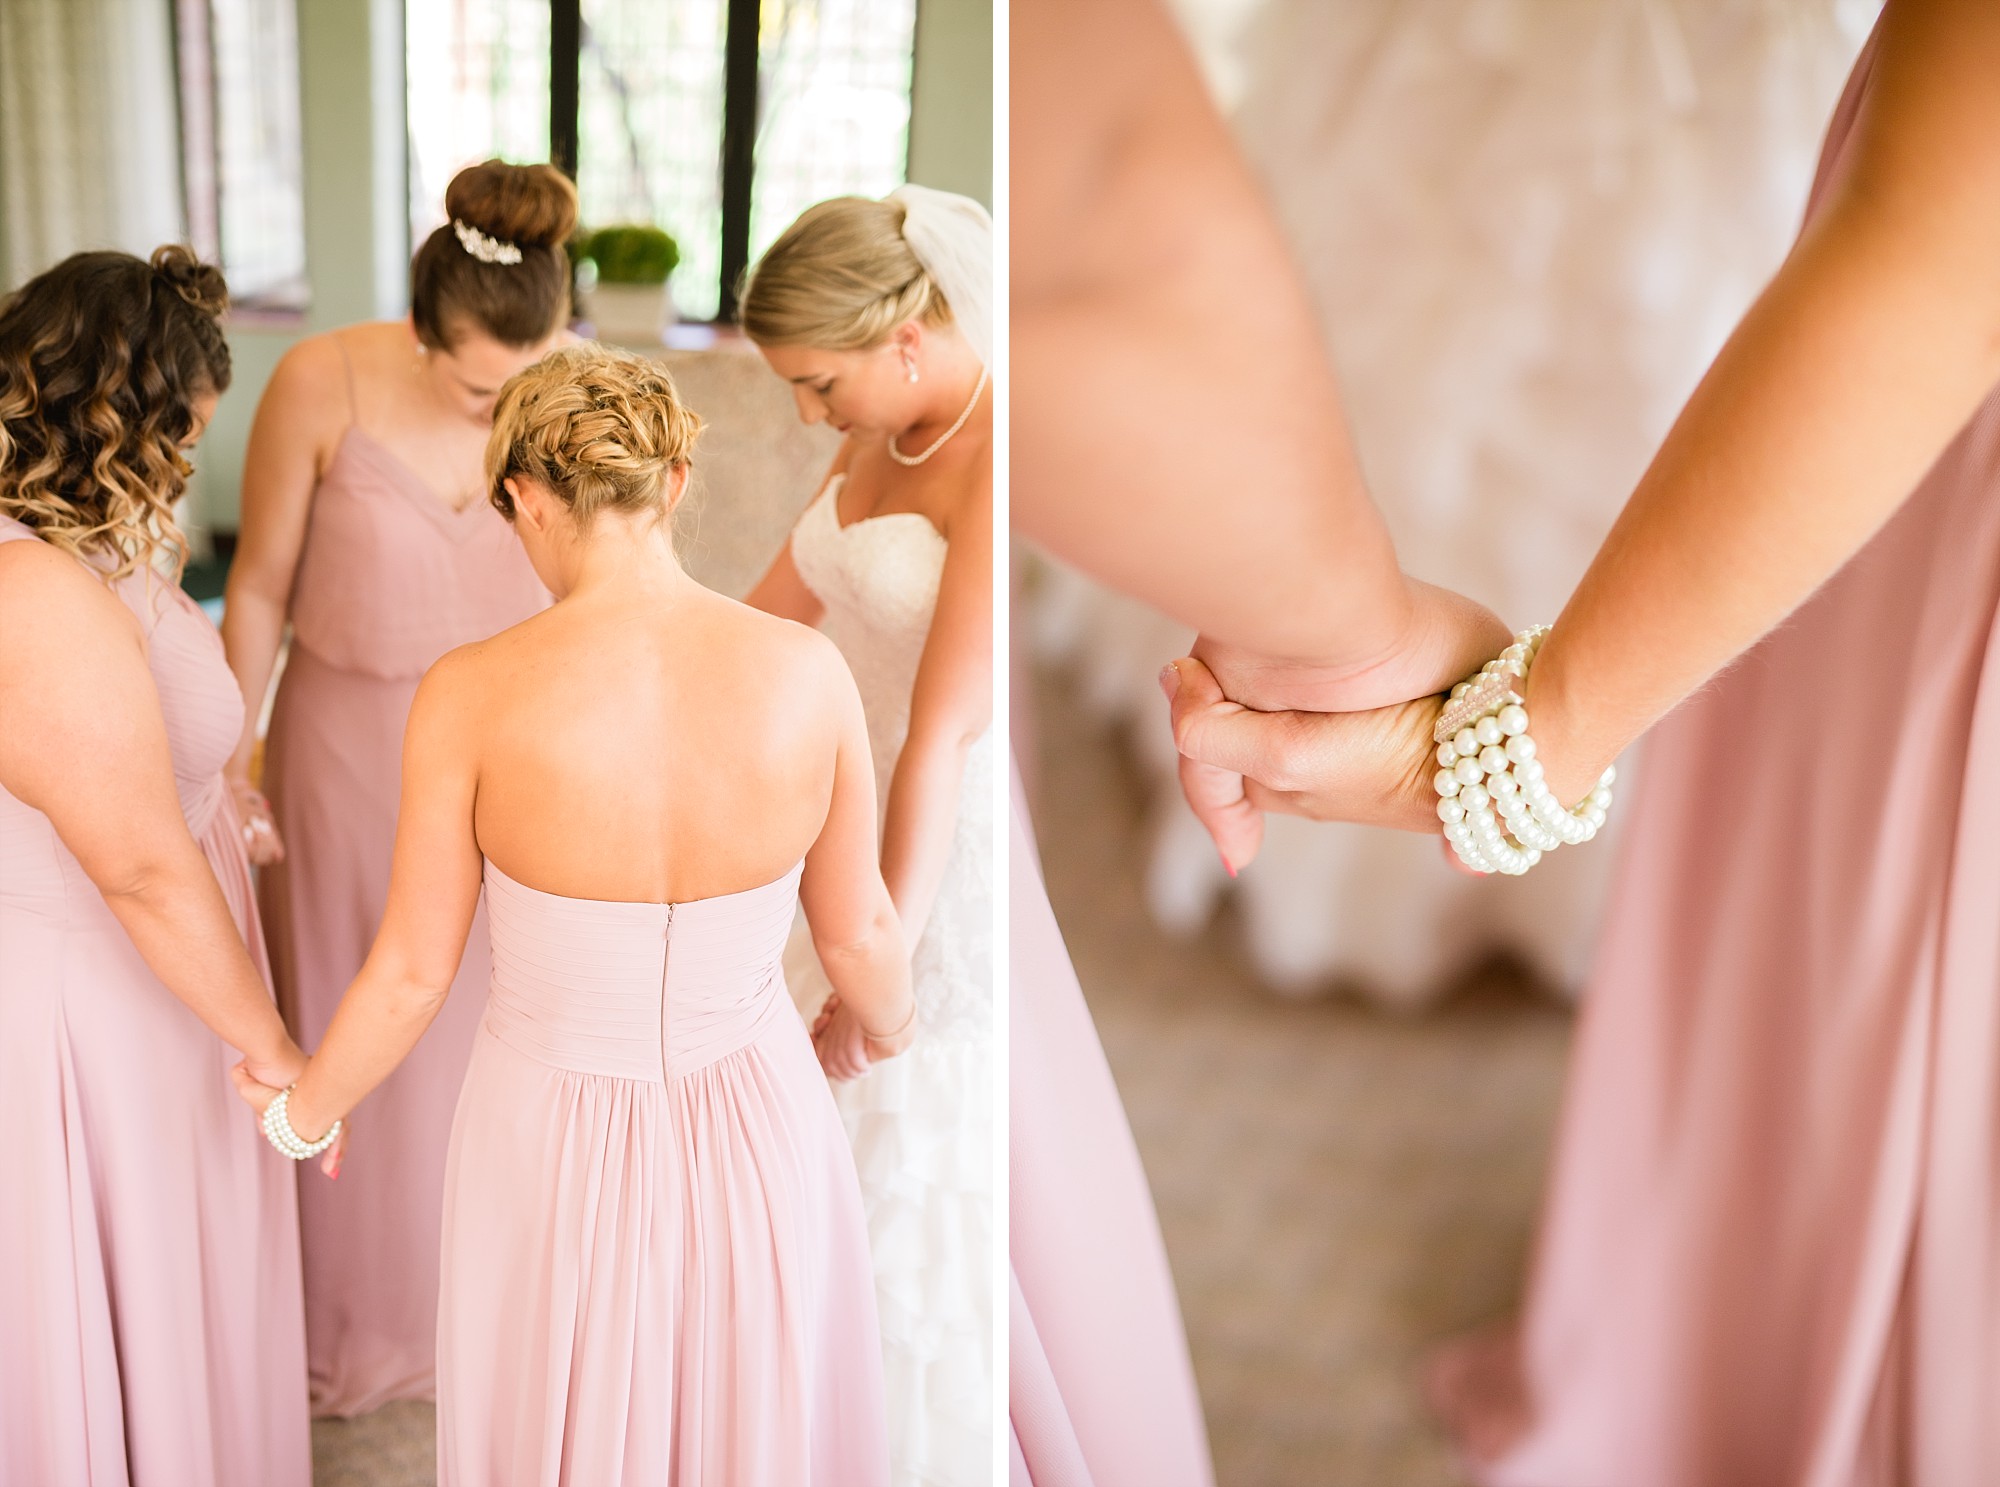 A classic springtime blush wedding at Michigan State University in East Lansing, Michigan by Breanne Rochelle Photography.